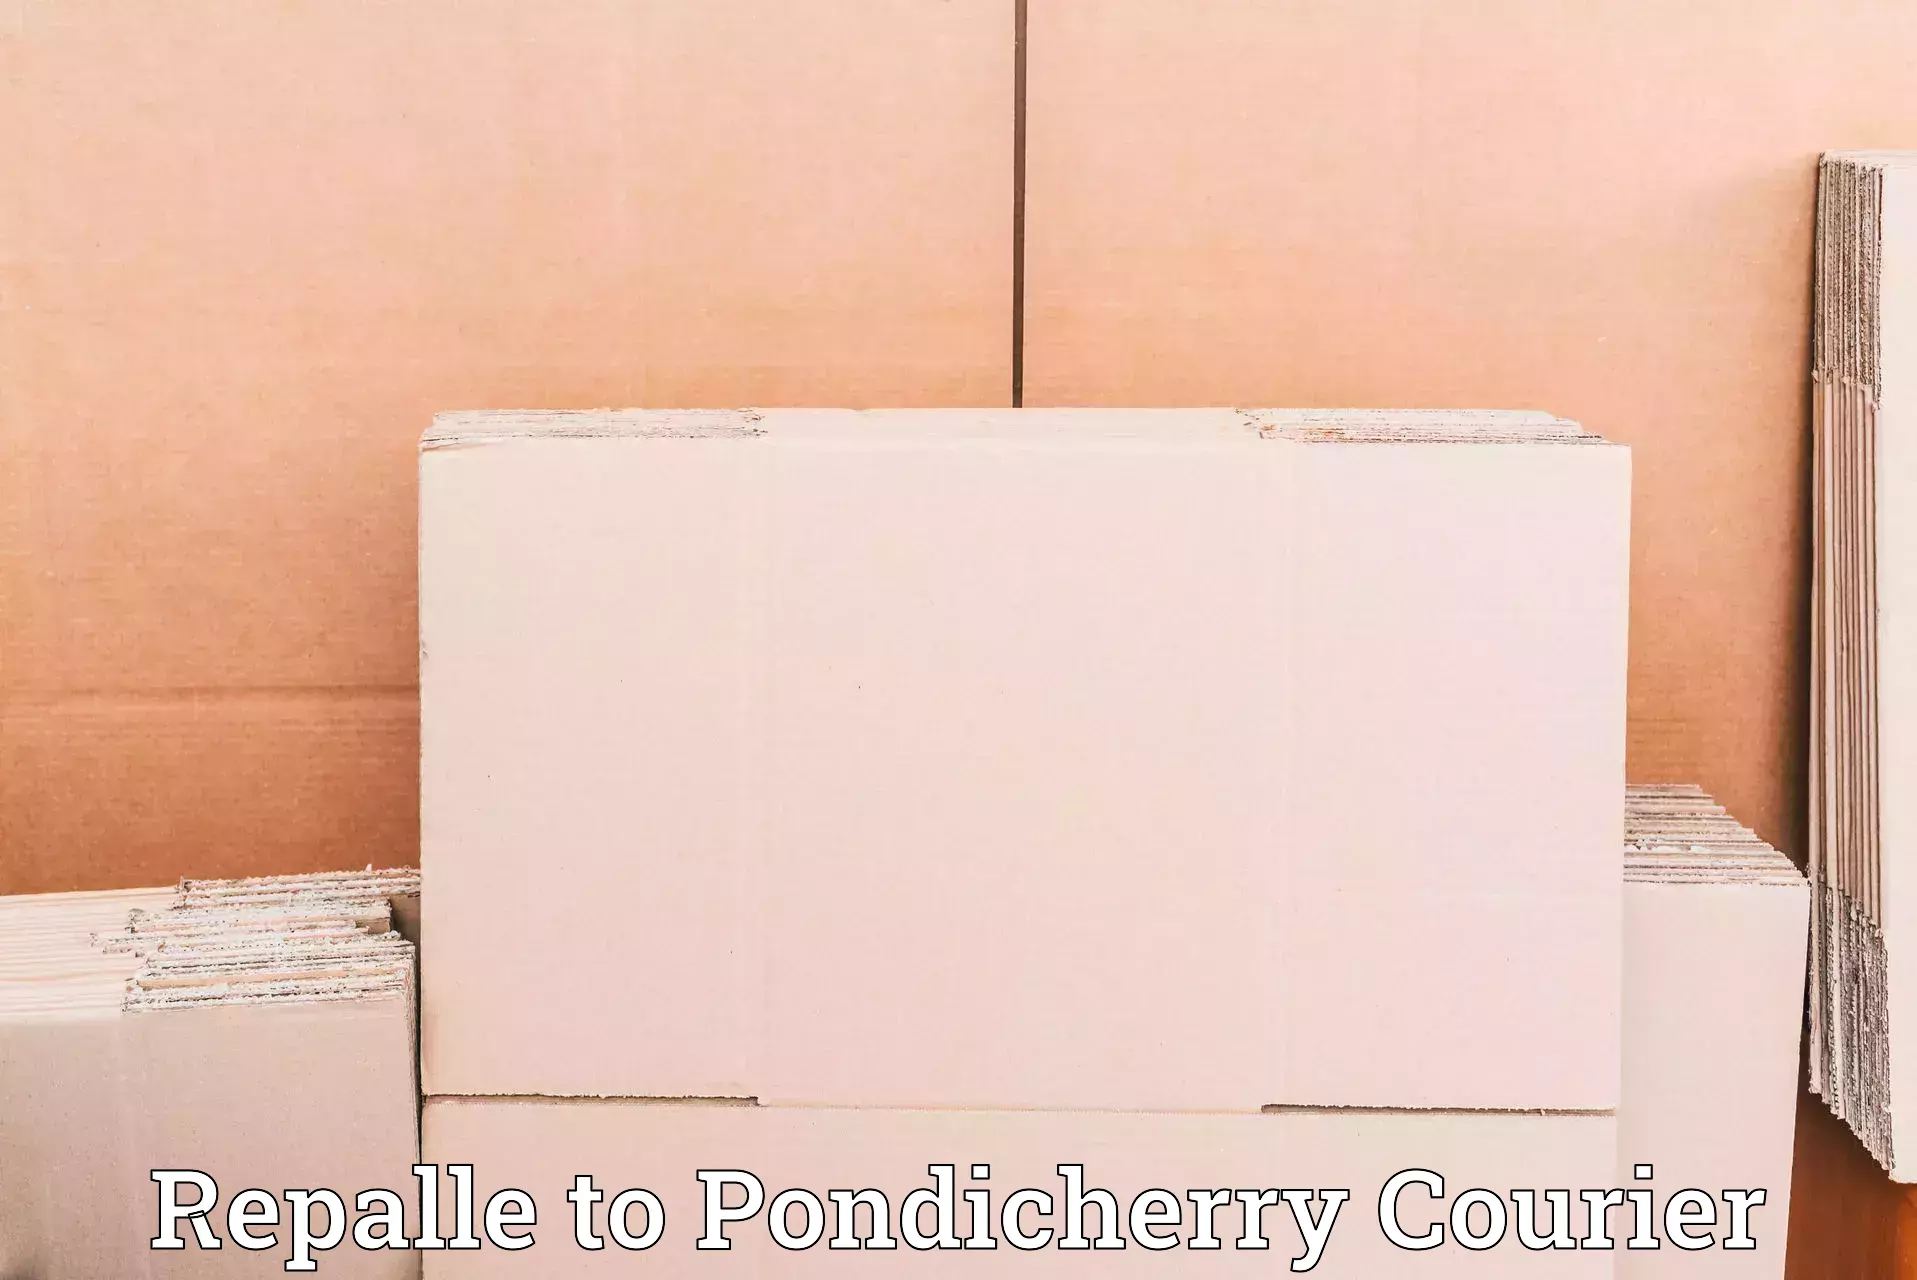 Professional courier services Repalle to Pondicherry